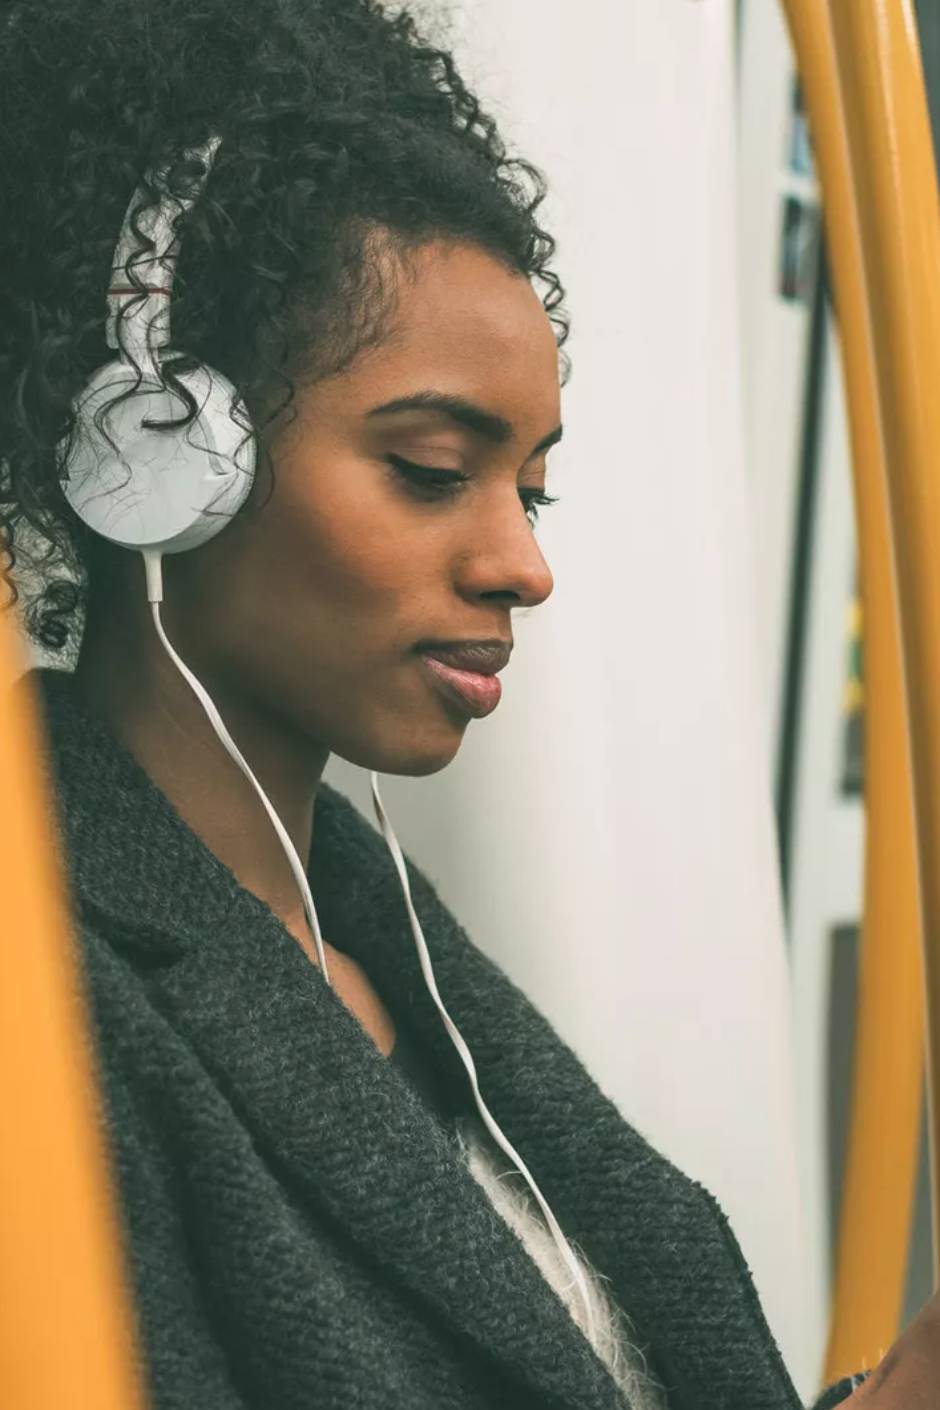 LiveScience - How does music affect your brain